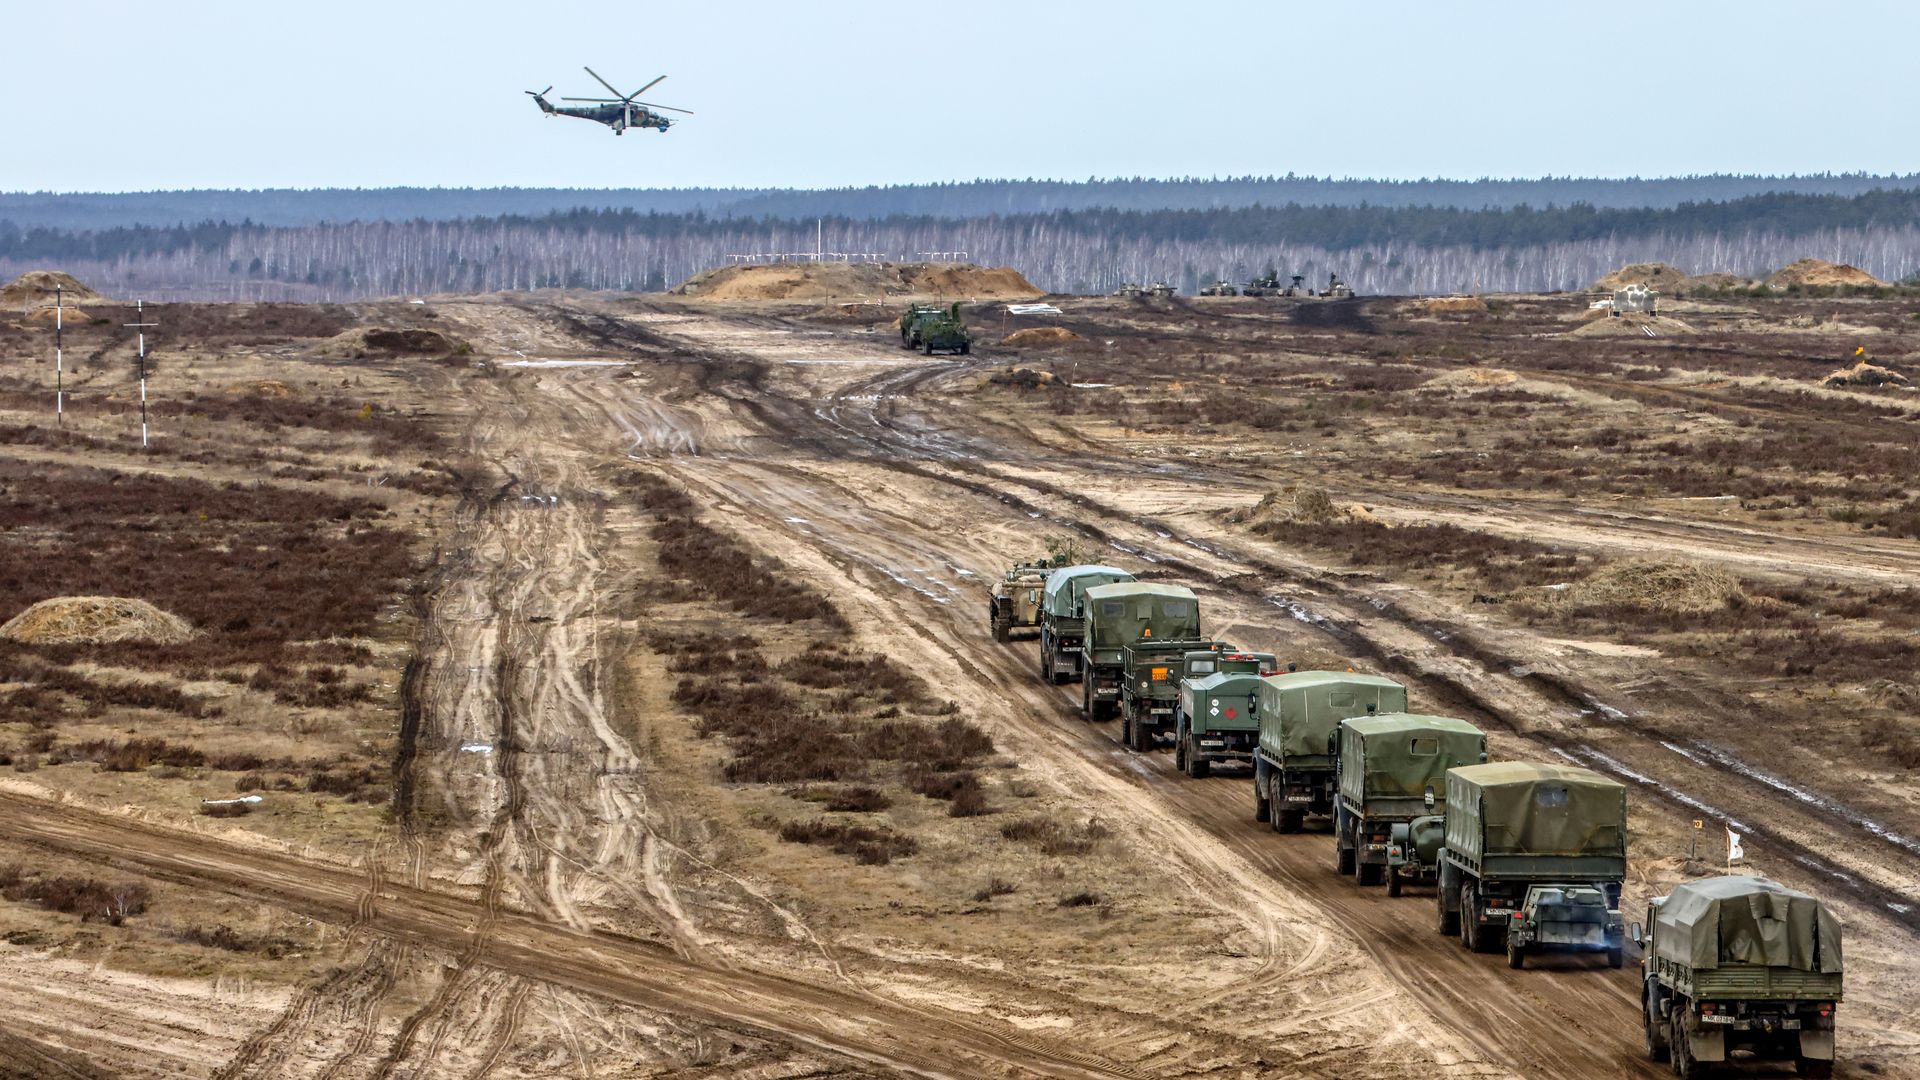 Russian and Belorusian joint drills